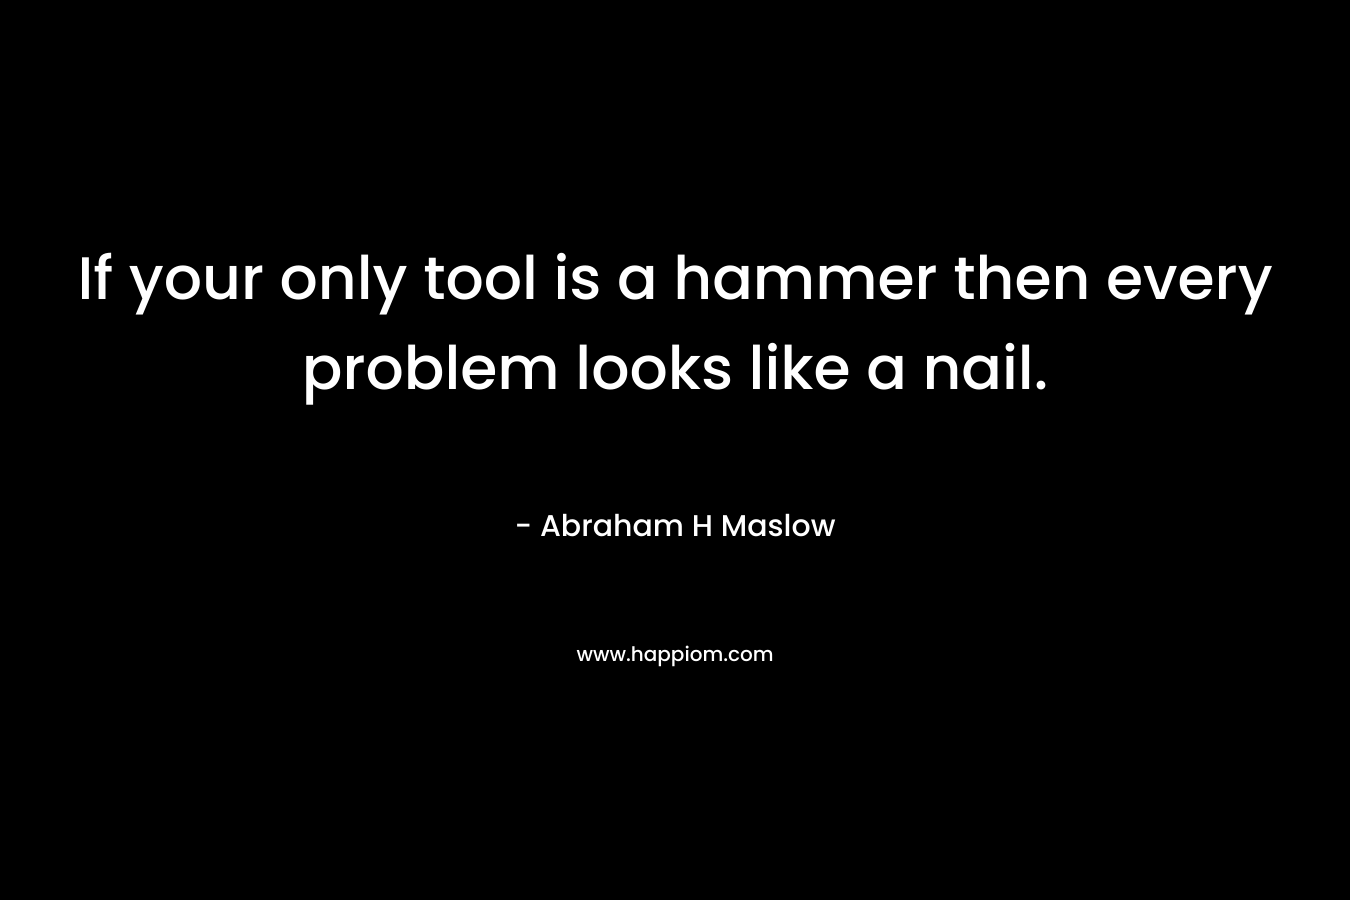 If your only tool is a hammer then every problem looks like a nail.